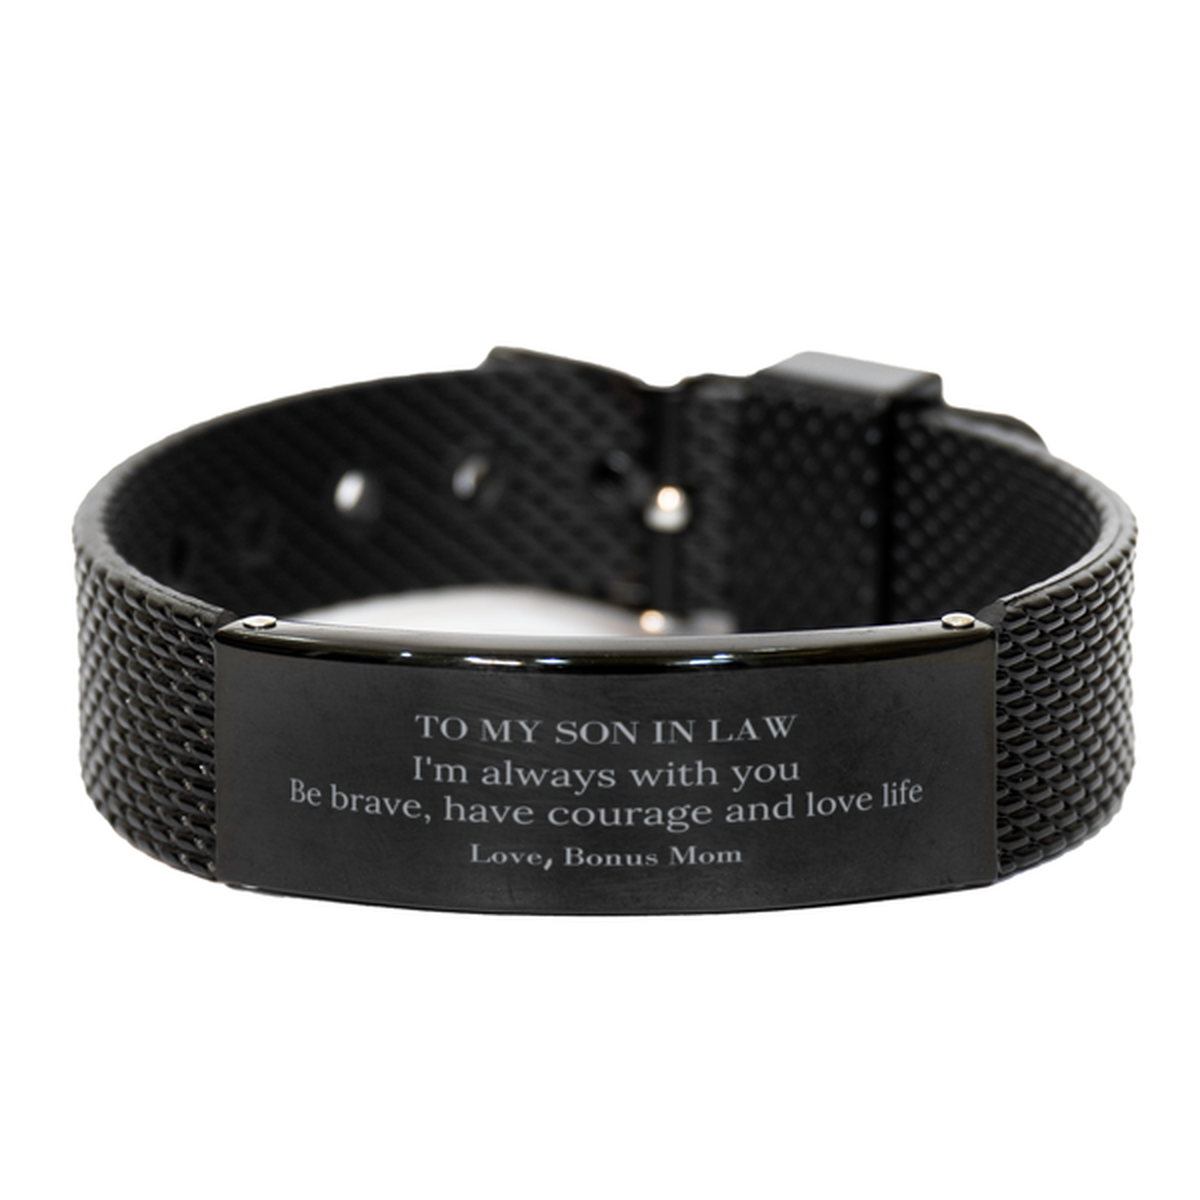 To My Son In Law Gifts from Bonus Mom, Unique Black Shark Mesh Bracelet Inspirational Christmas Birthday Graduation Gifts for Son In Law I'm always with you. Be brave, have courage and love life. Love, Bonus Mom